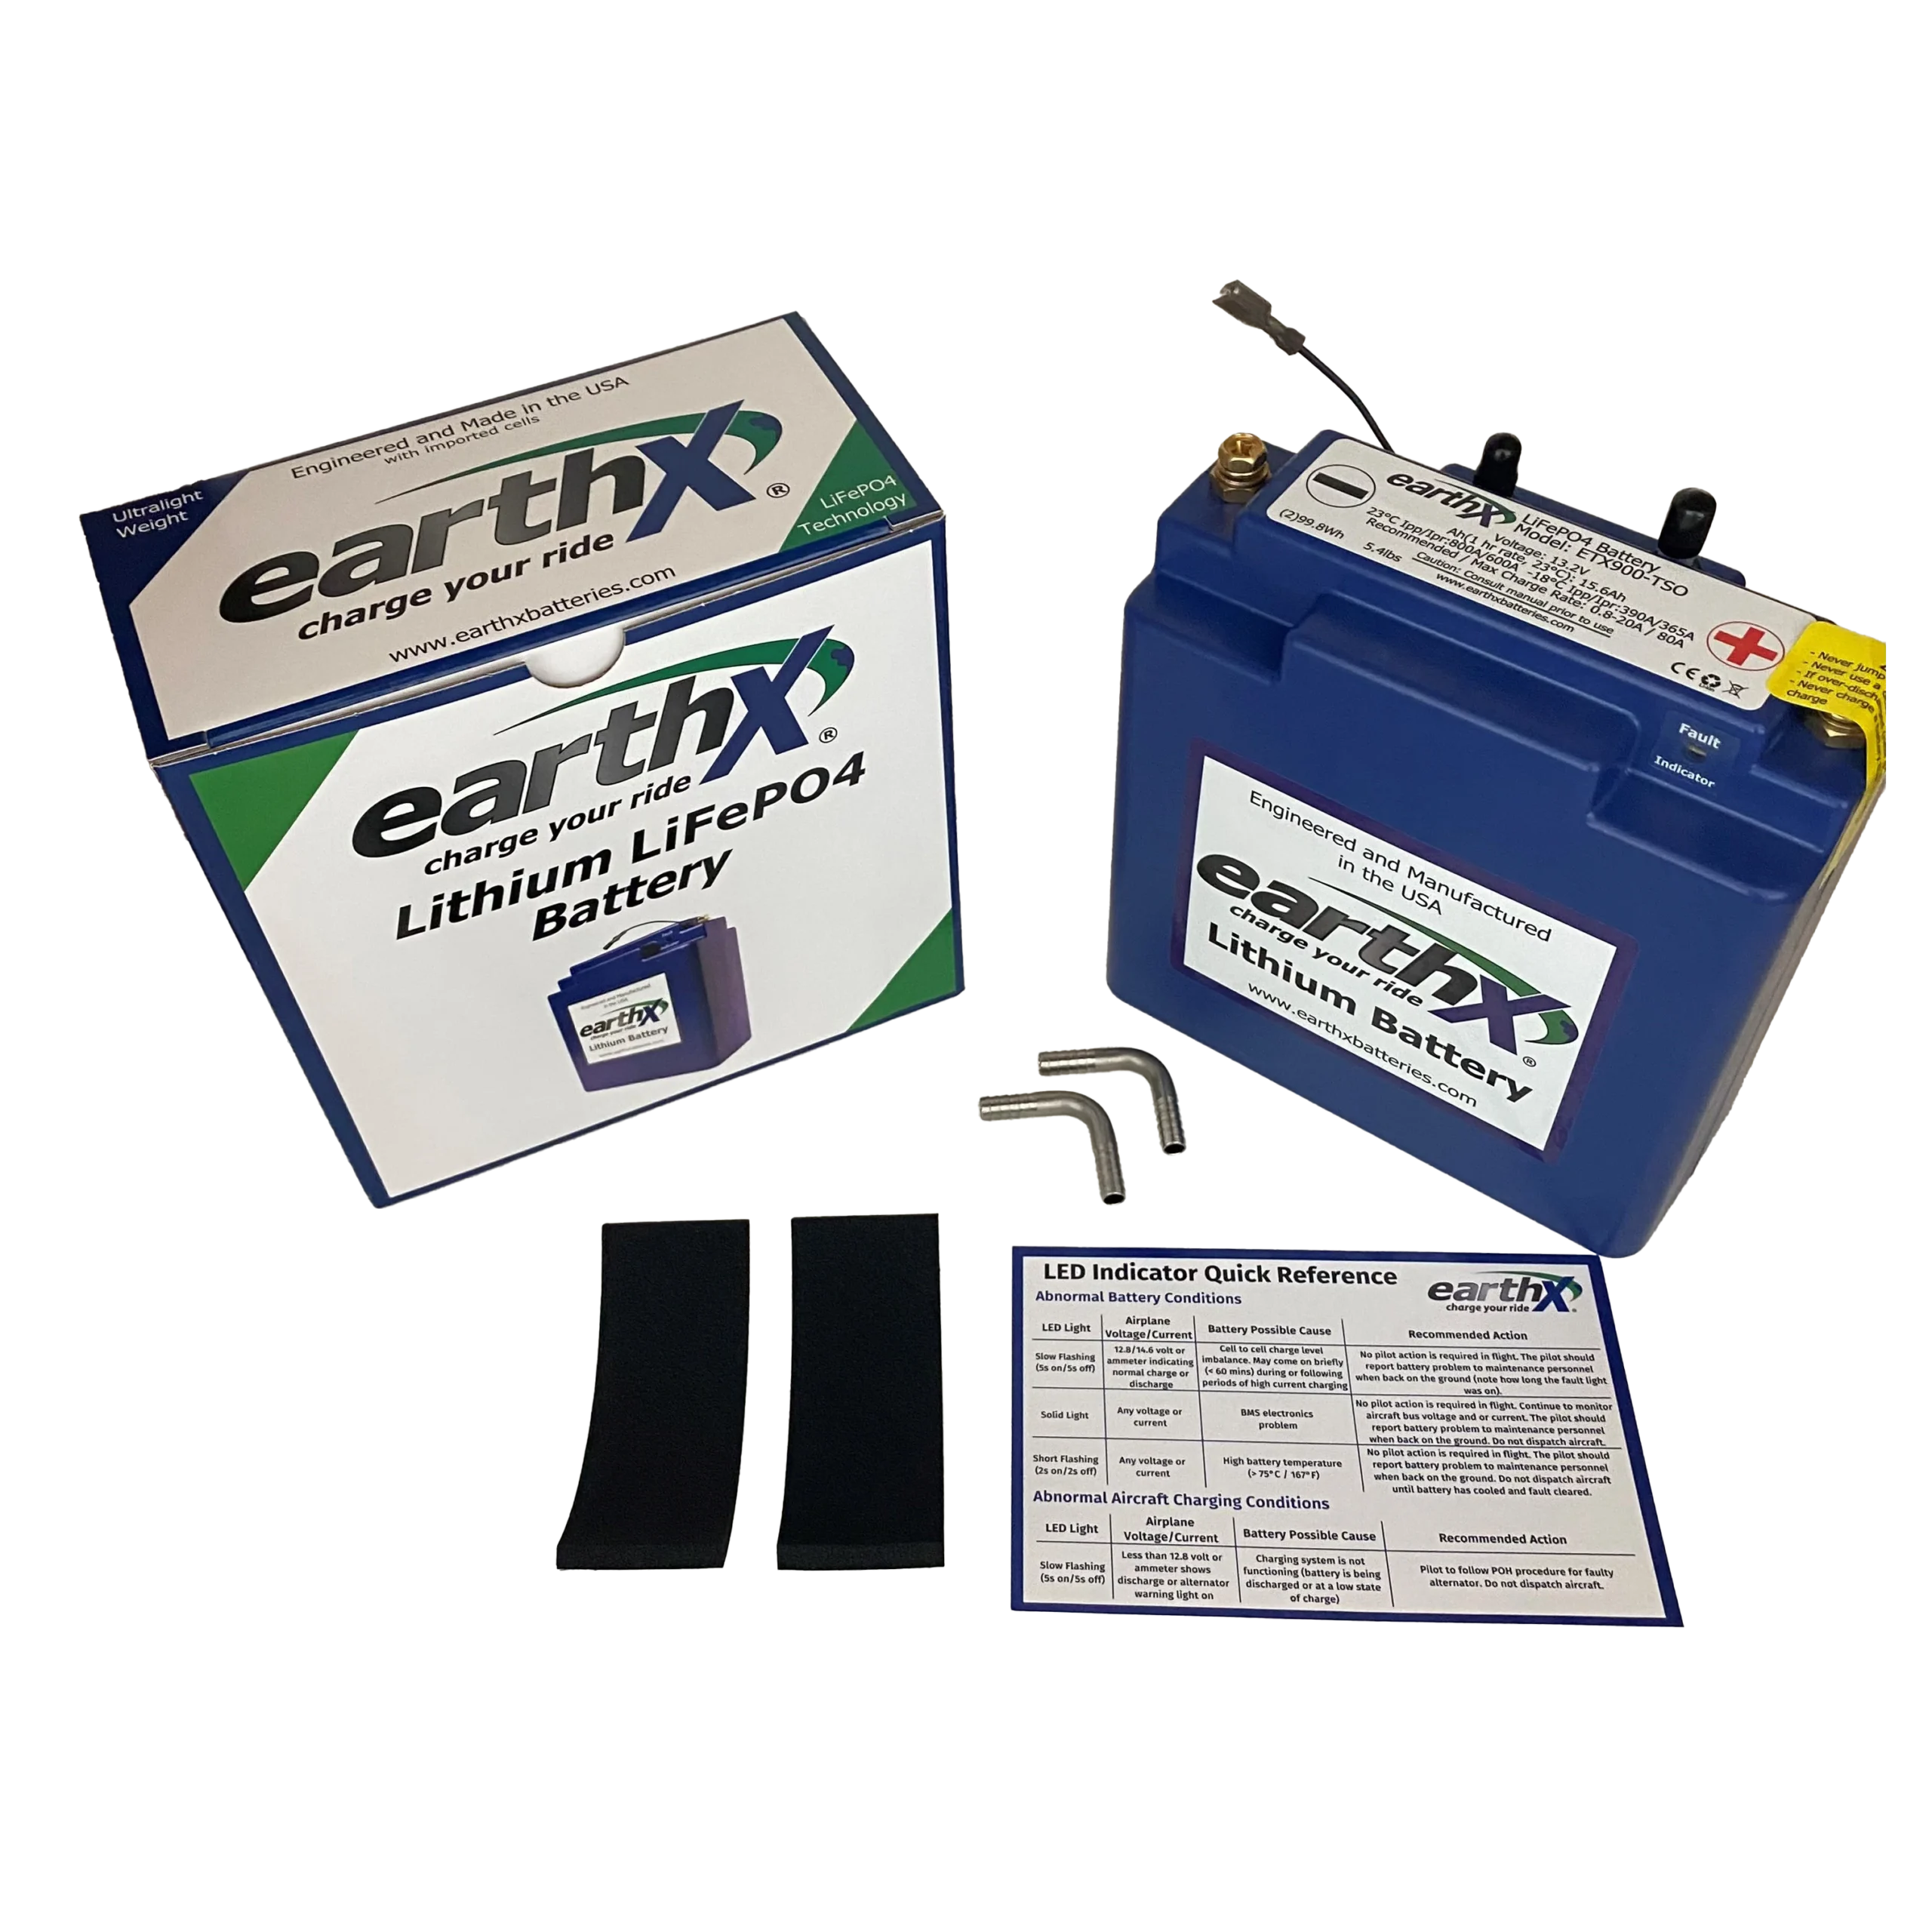 ETX900-TSO  FAA Approved Certified Lithium Aircraft Battery